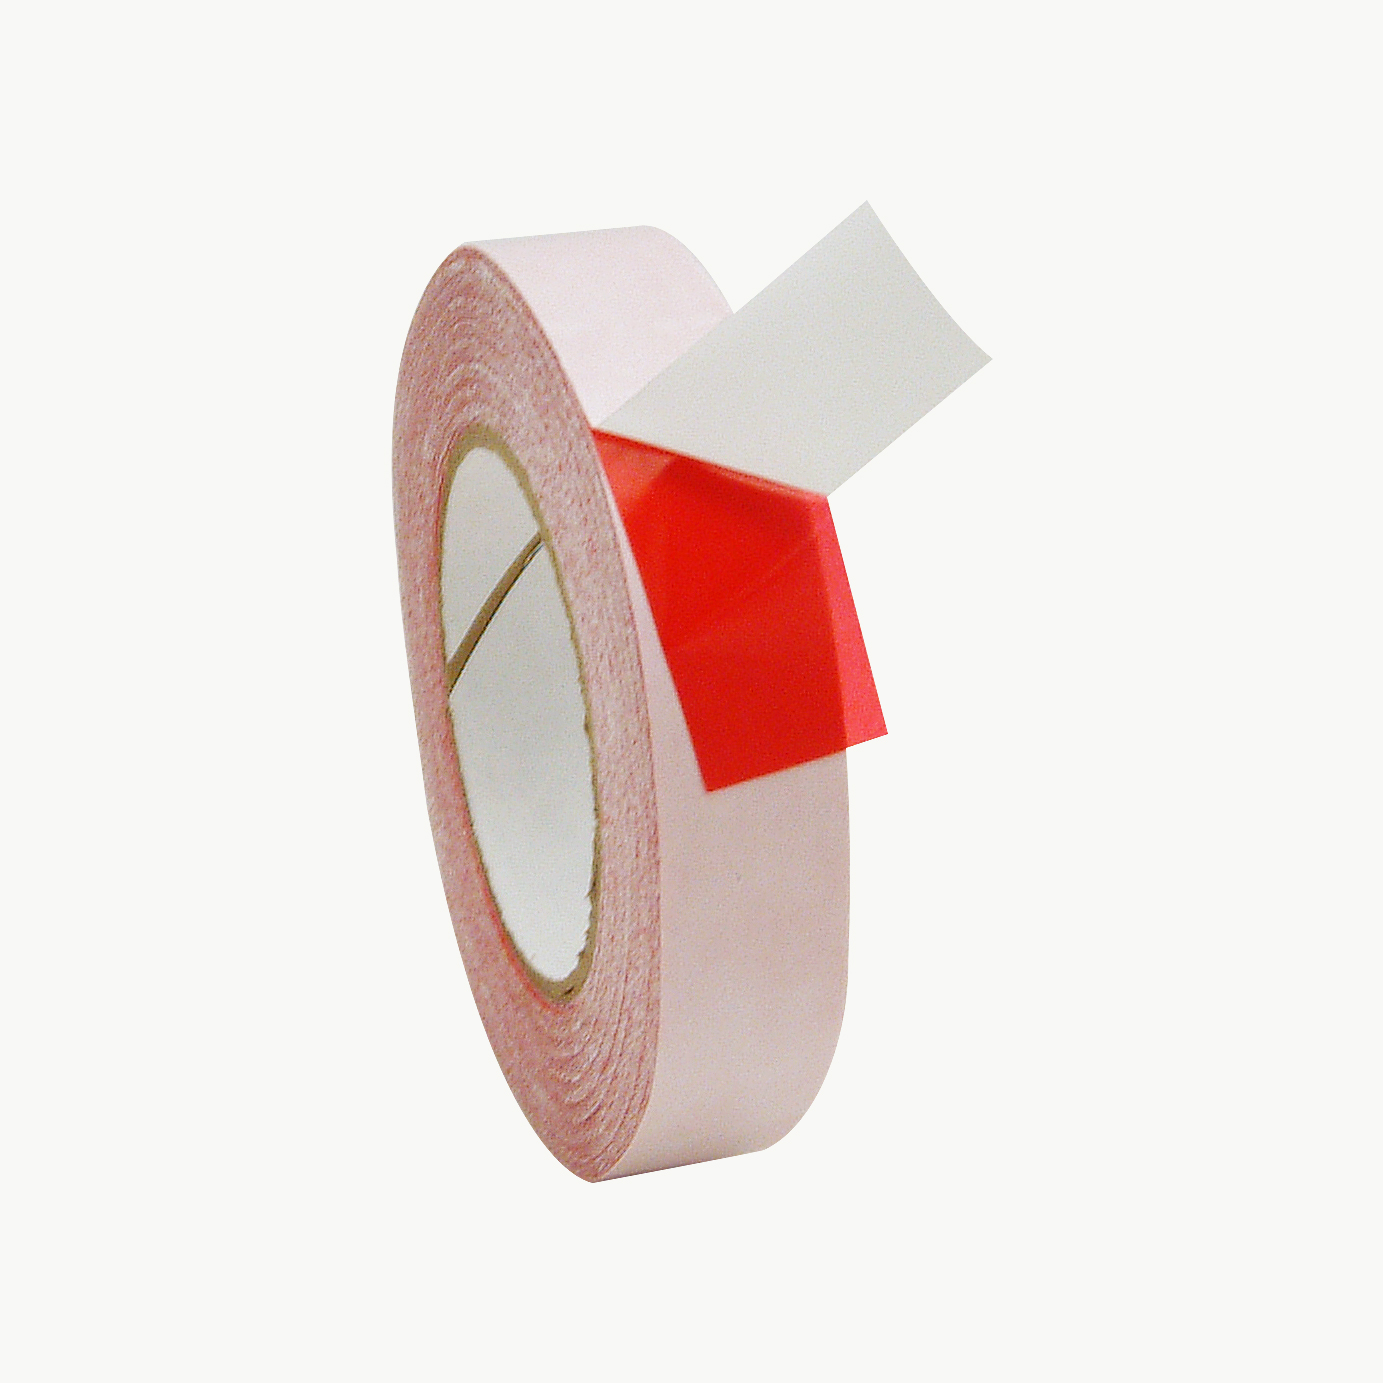 JVCC DC-PETF35-R Double-Sided Red Polyester Film Tape [Acrylic Adhesive]